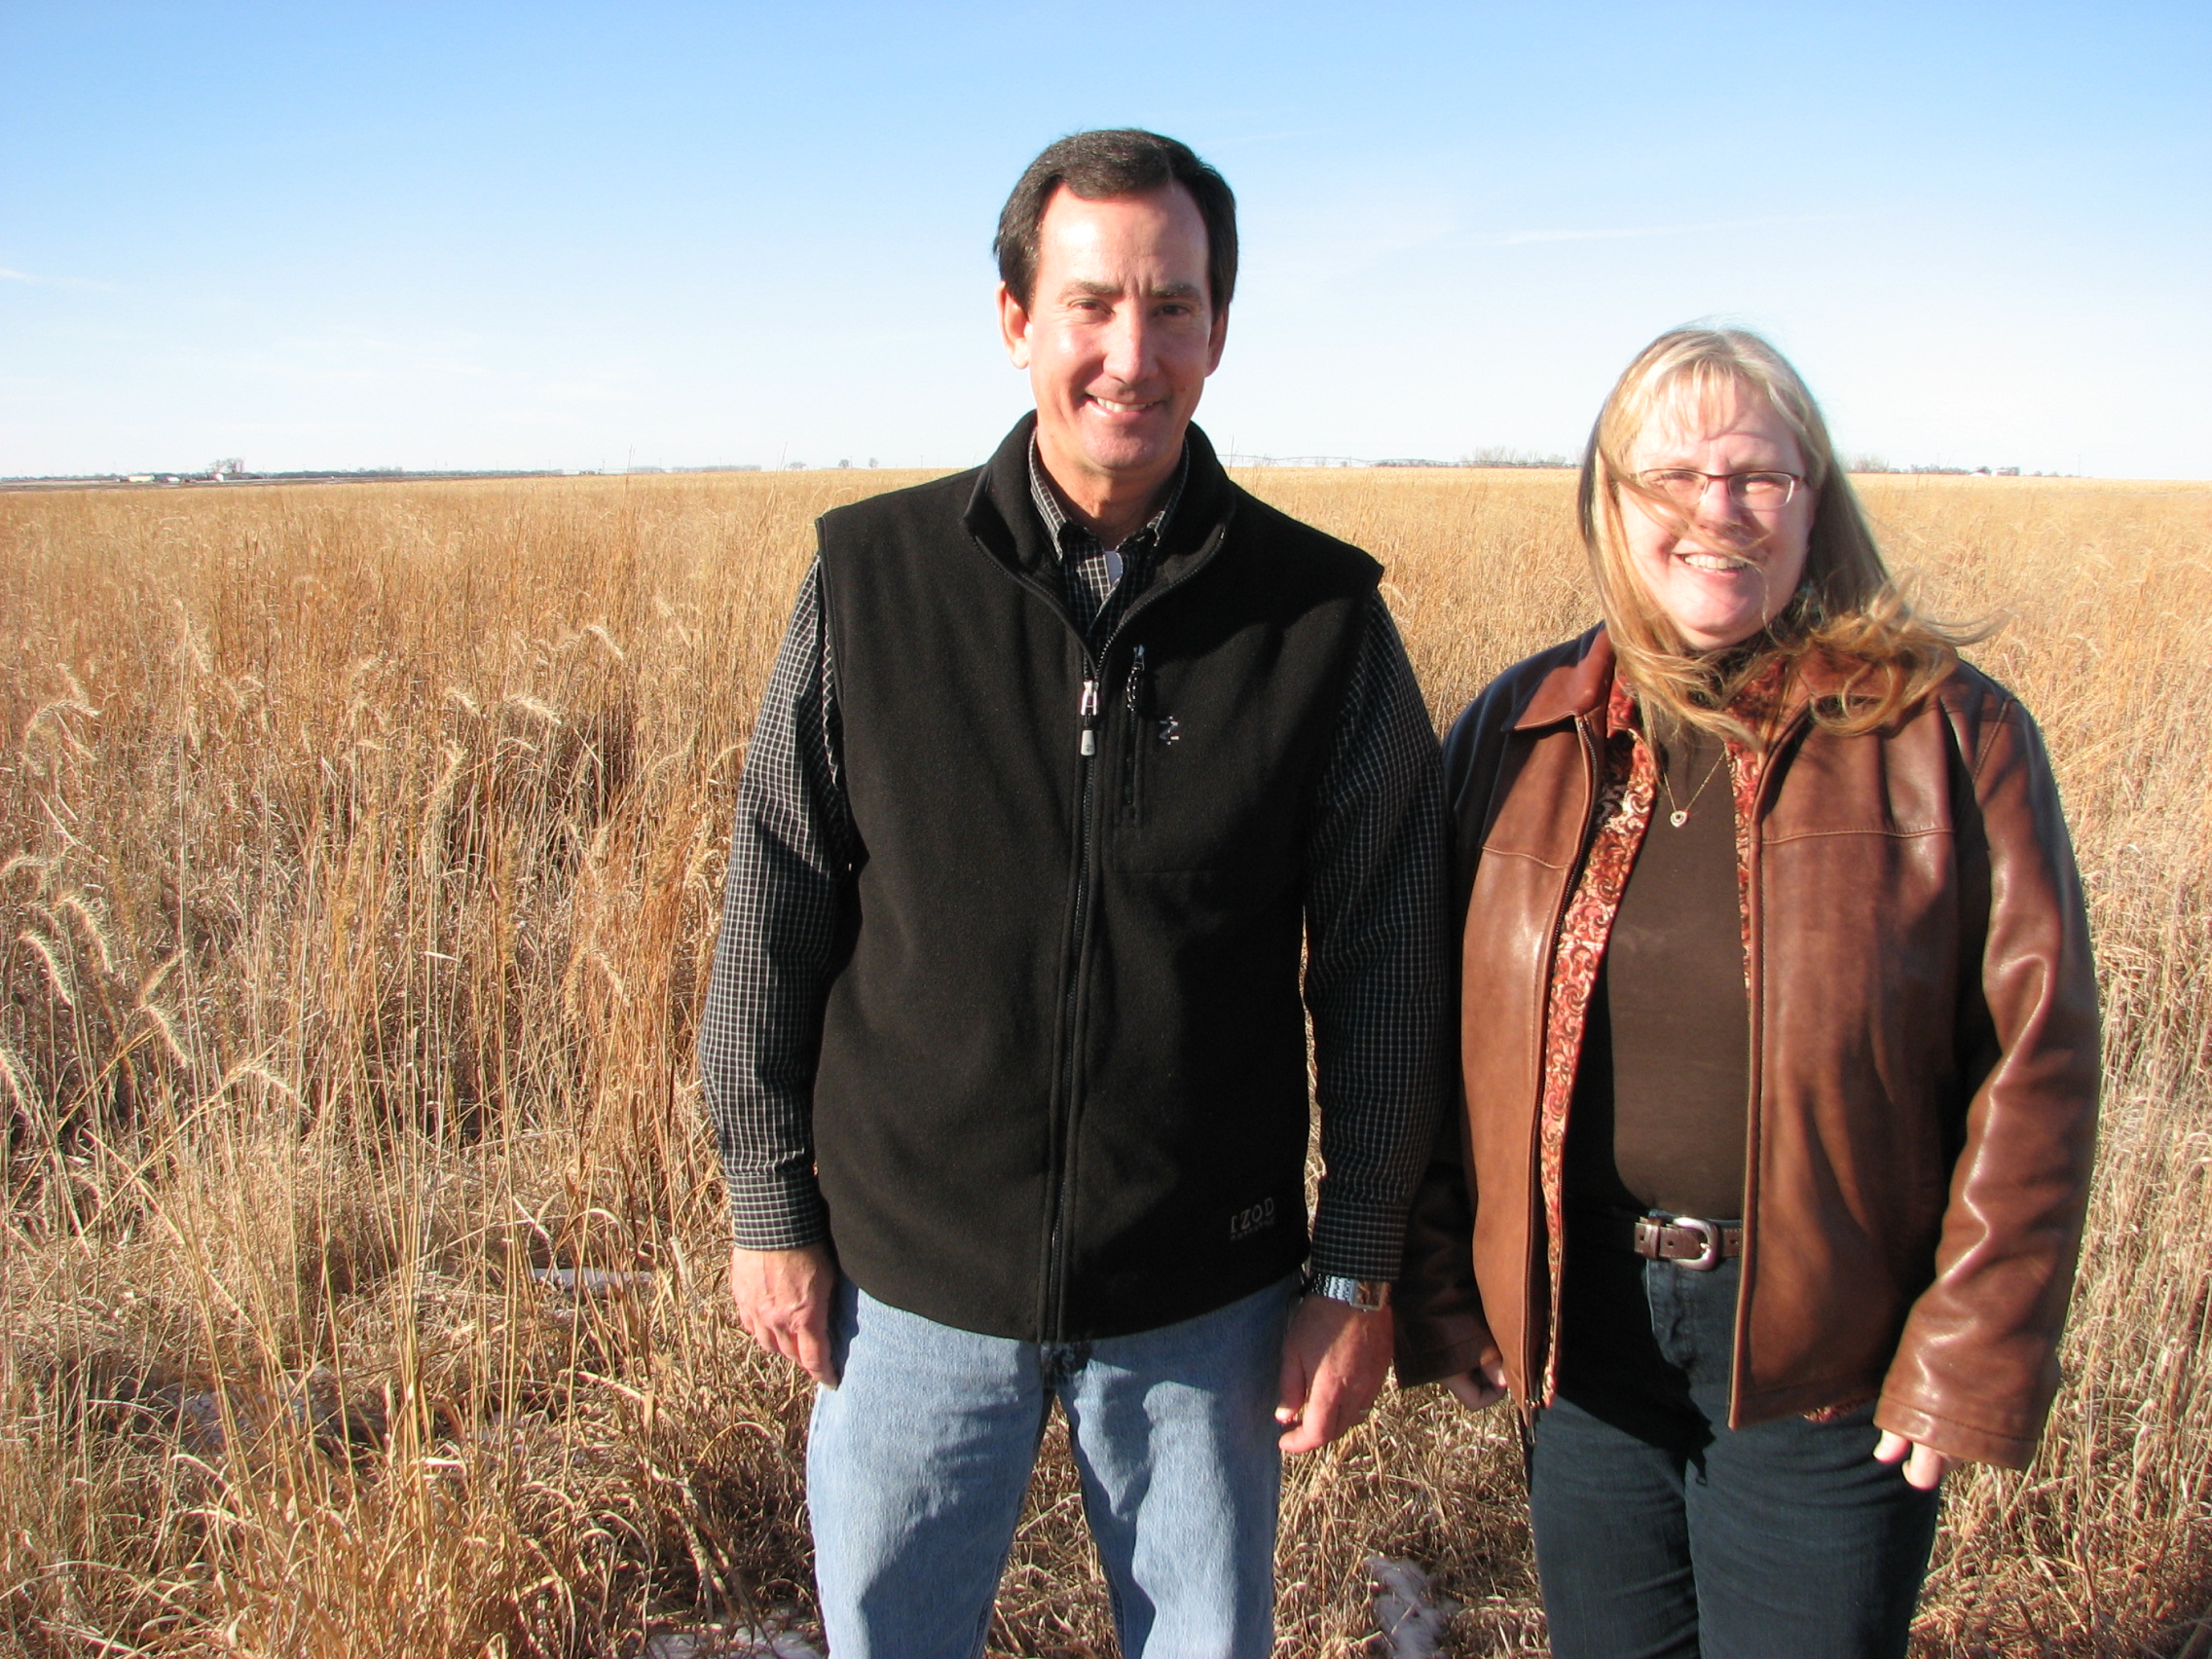 The Rainwater Basin Joint Venture worked with landowners Don and Shanda Cox on a large wetland restoration project just north of Hastings, Nebraska. Photo taken in 2011 by Joanna Pope, NRCS.